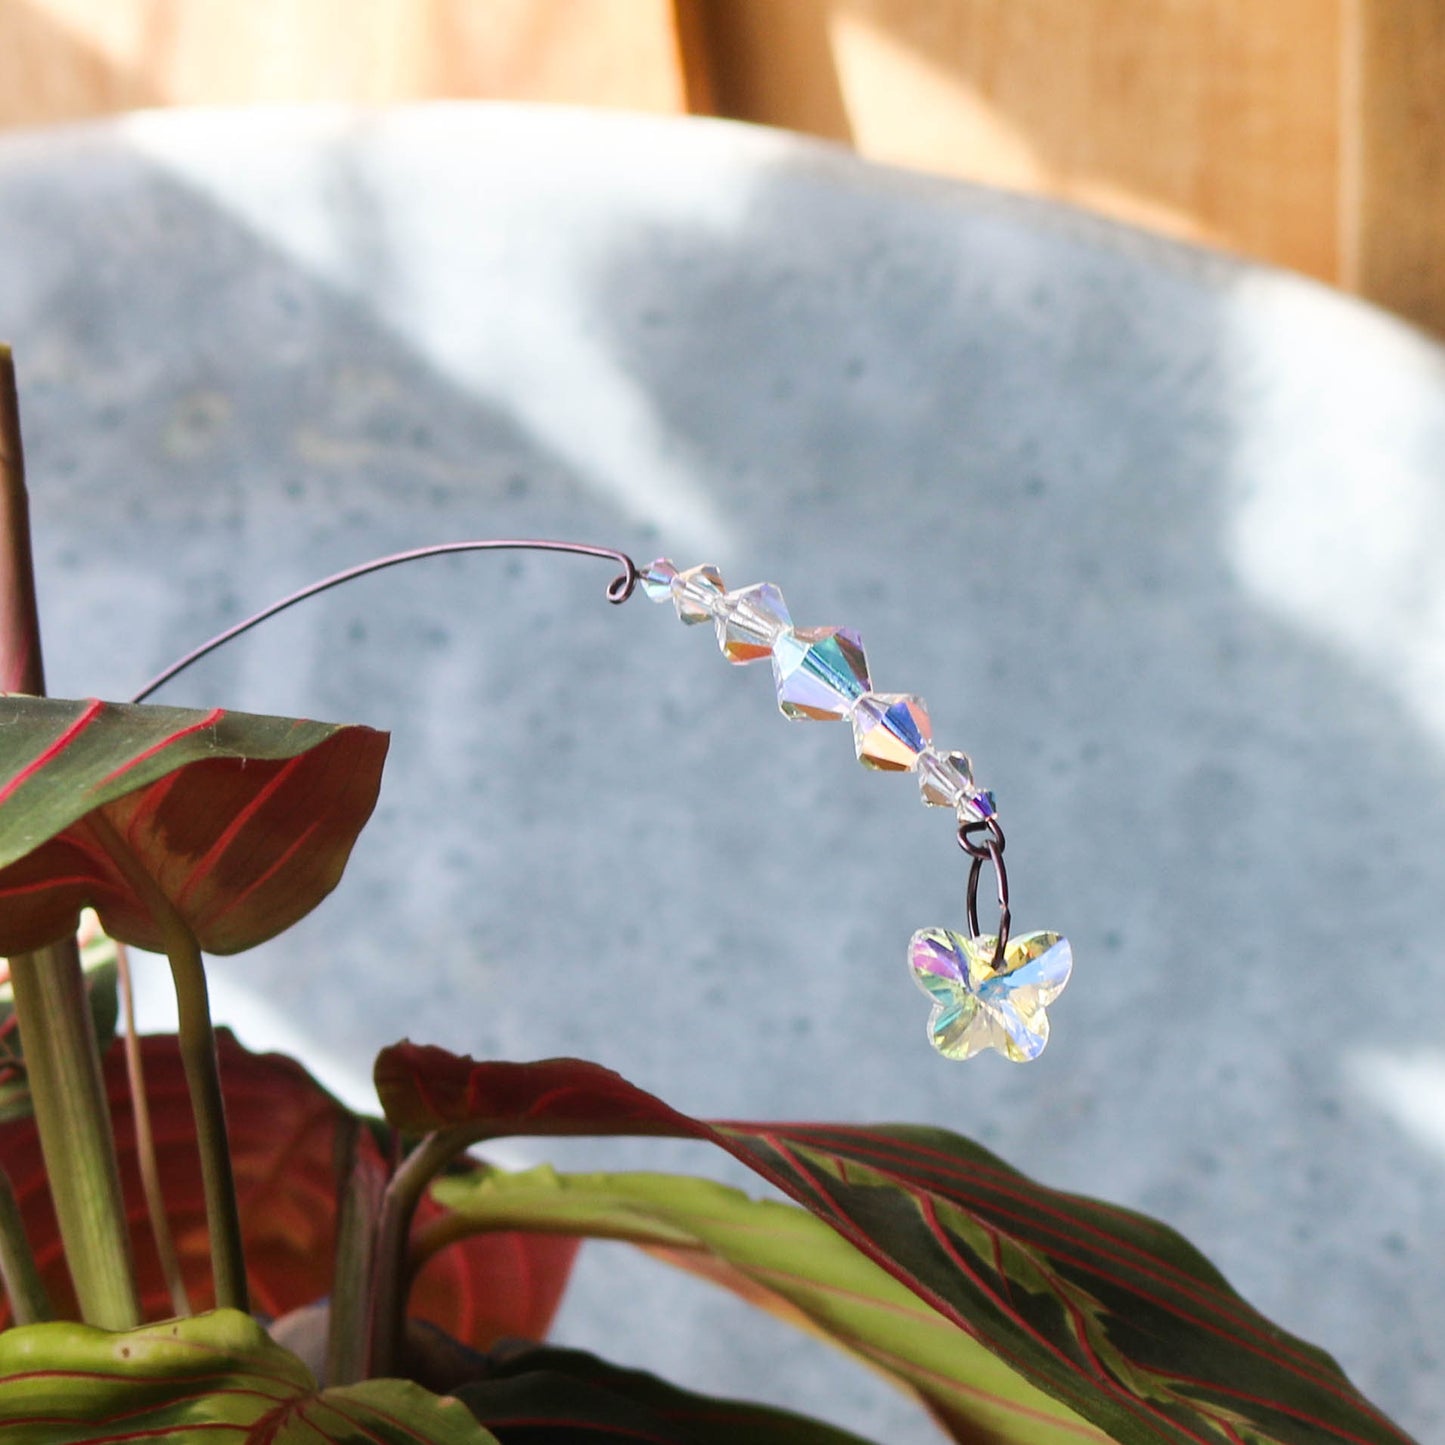 Handcrafted Crystal Butterfly Plant Marker - Sprinkle Joy and Rainbows on Your Green Oasis